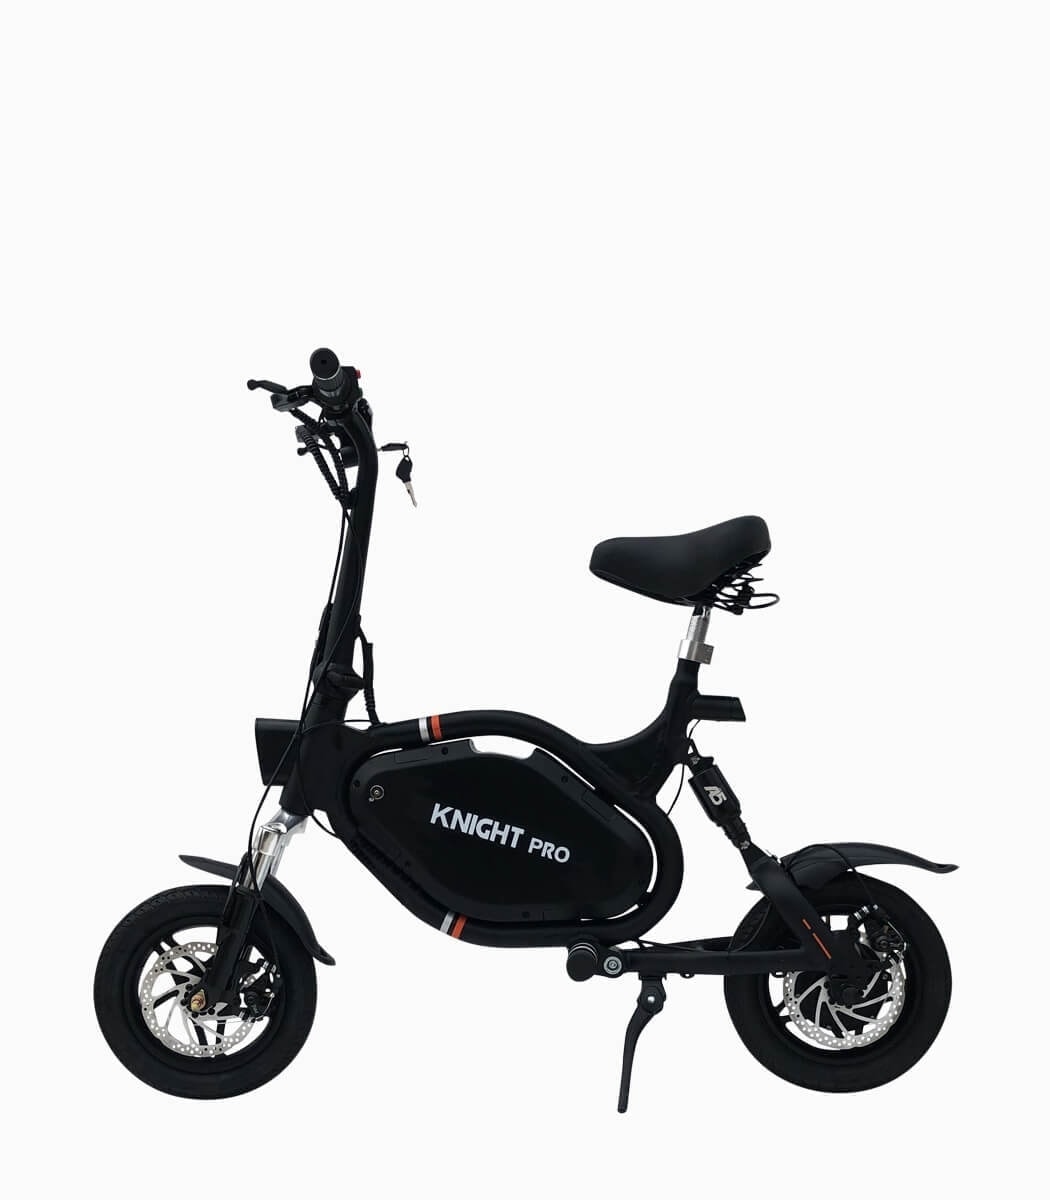 KNIGHT PRO (BLACK17.5AH) UL2272 certified electric scooter left V1